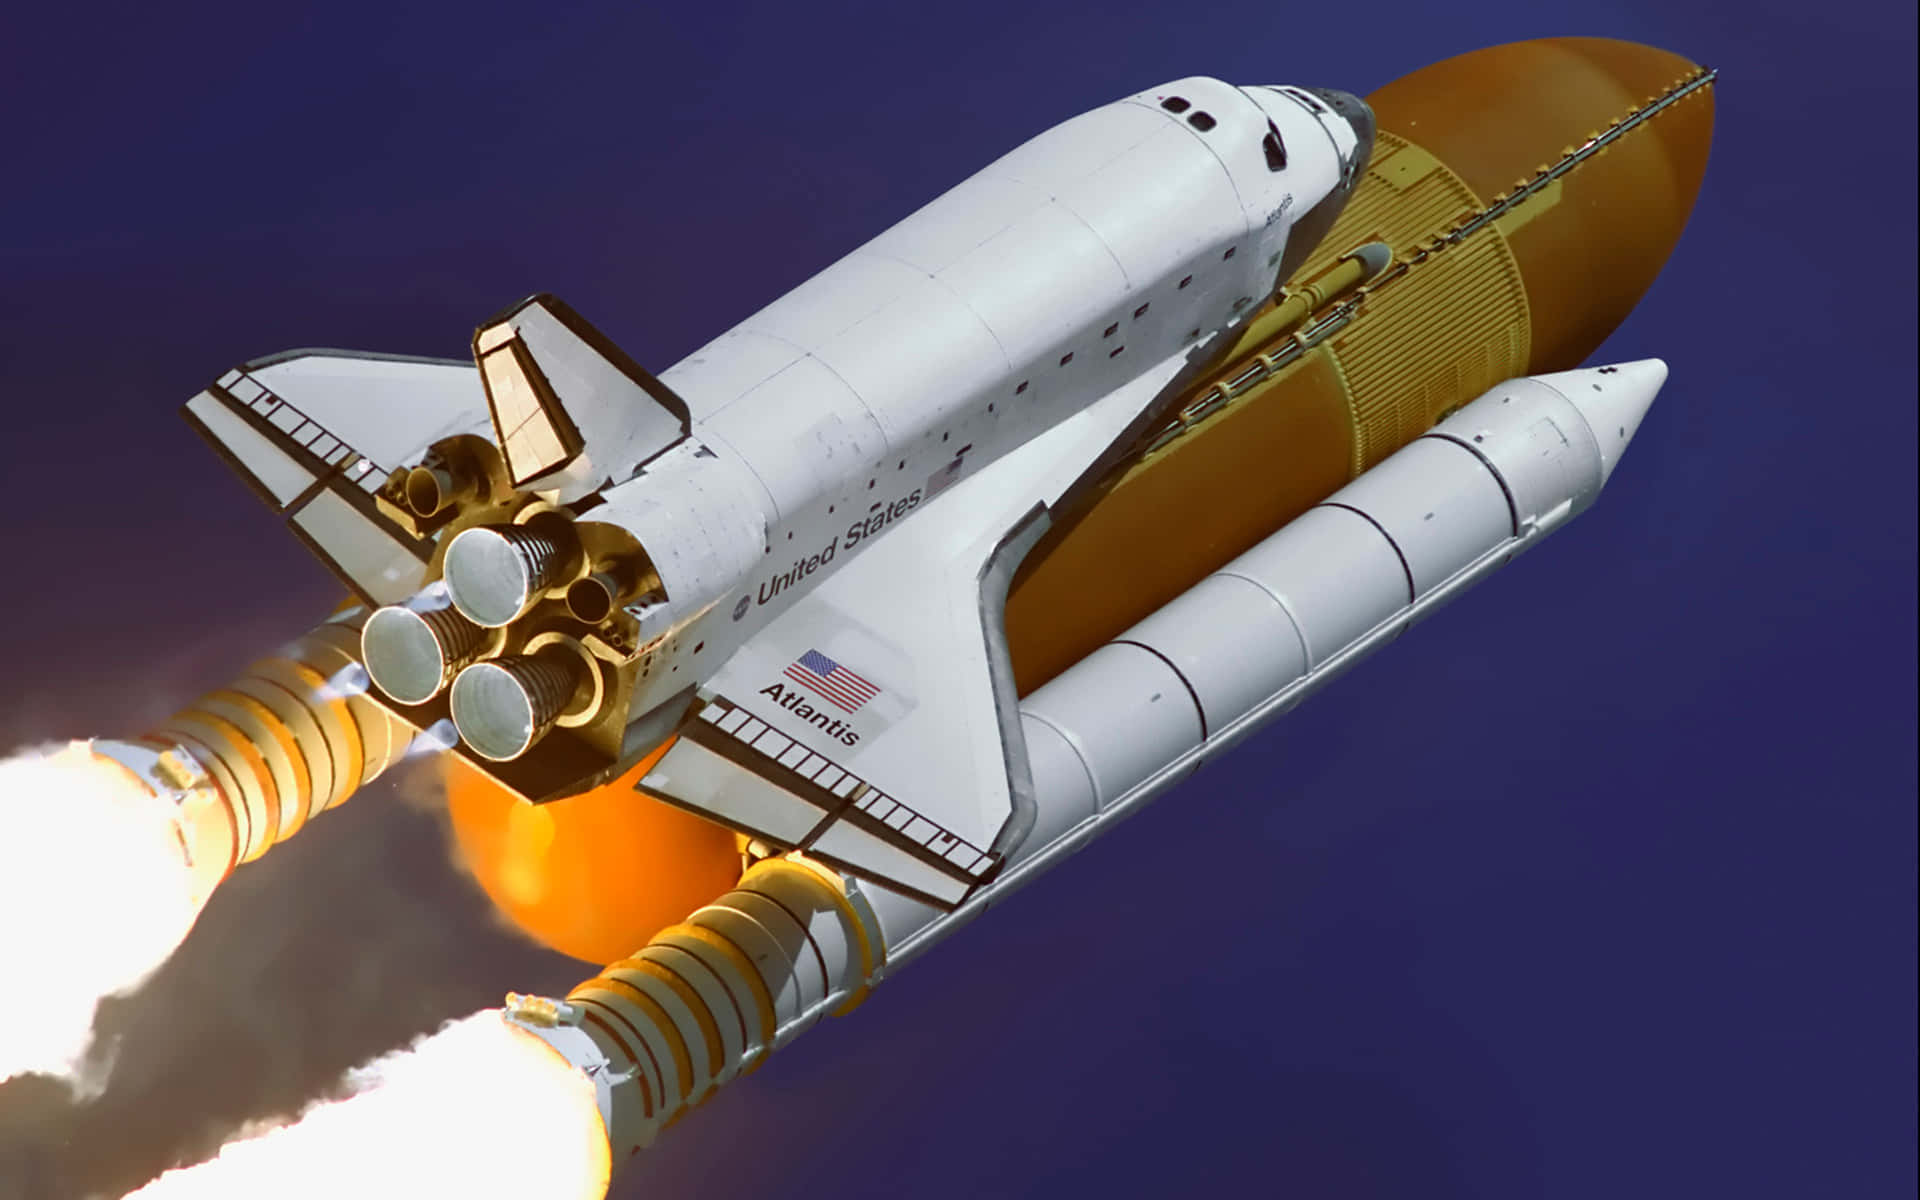 A close-up view of a rocket's bright-lit engine.